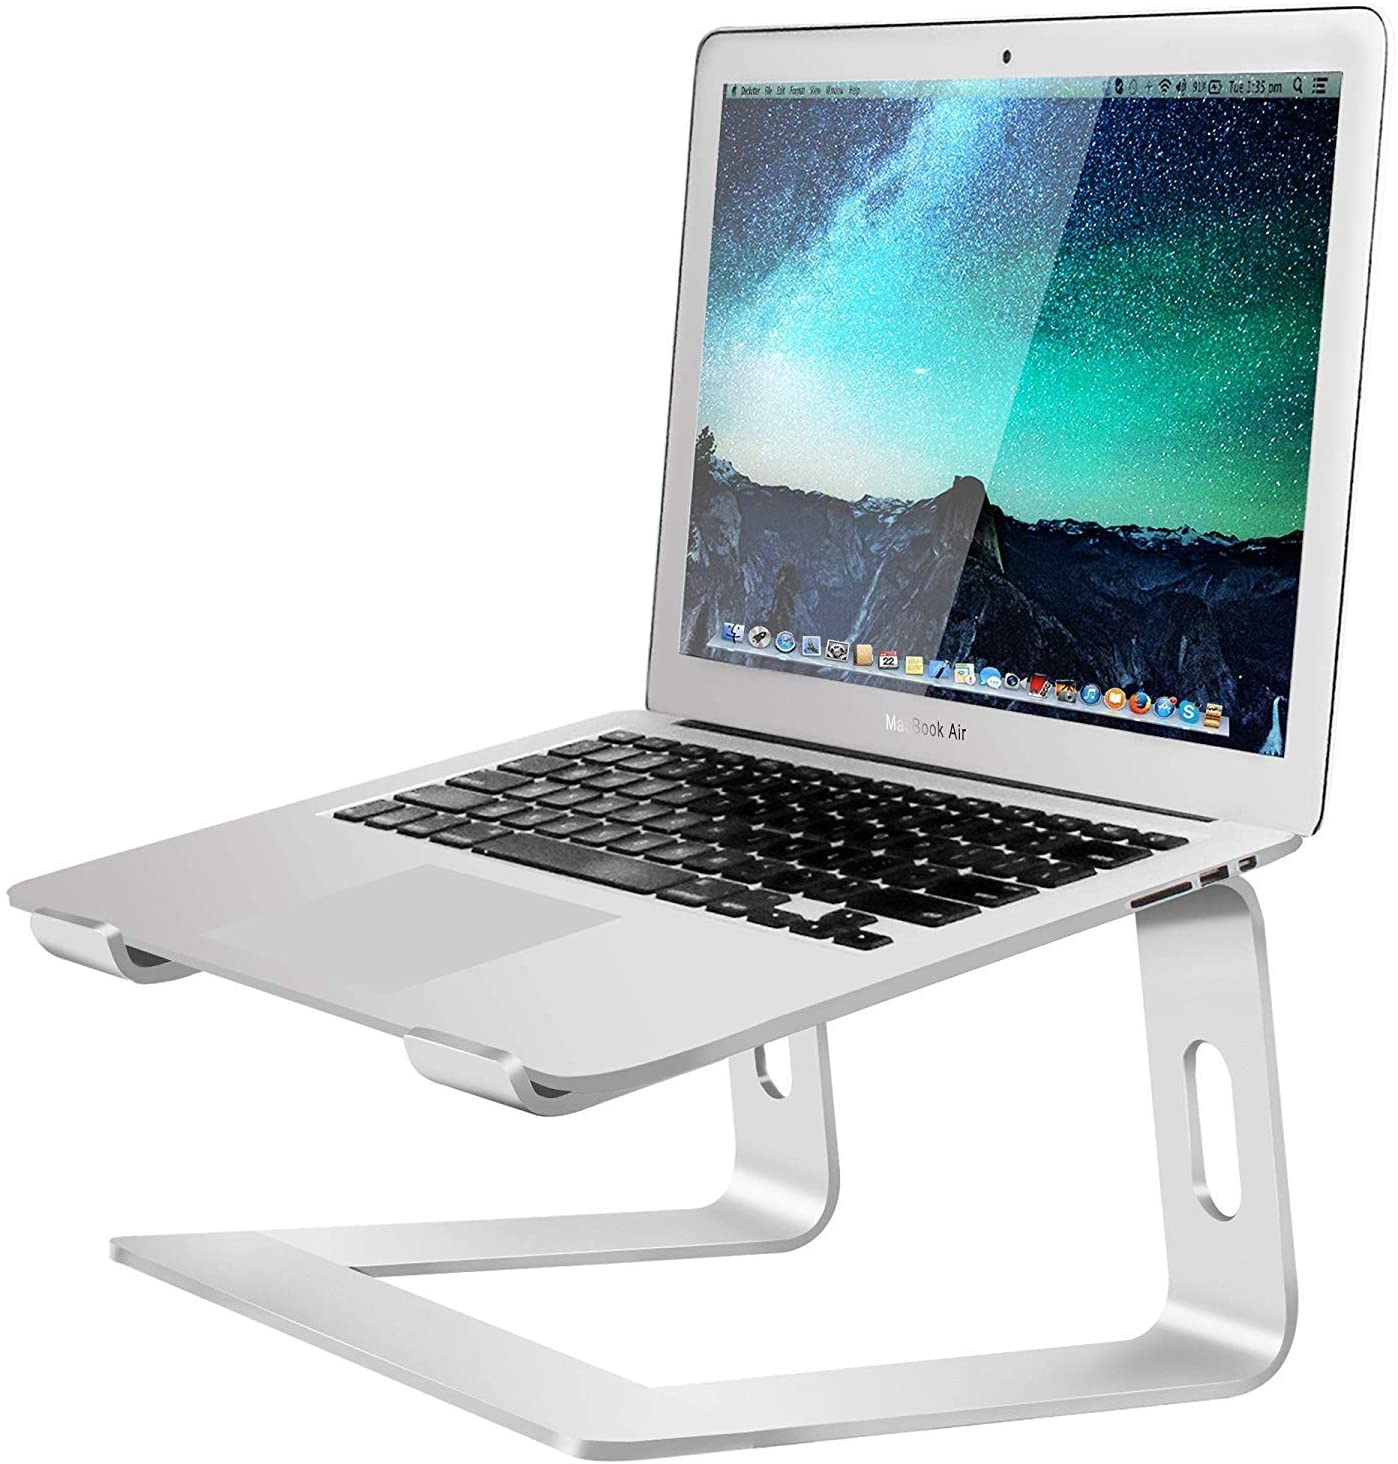 Soundance Aluminum Laptop Stand Metal Holder Compatible with 10 to 15.6 Inches Notebook Computer Silver $15.46